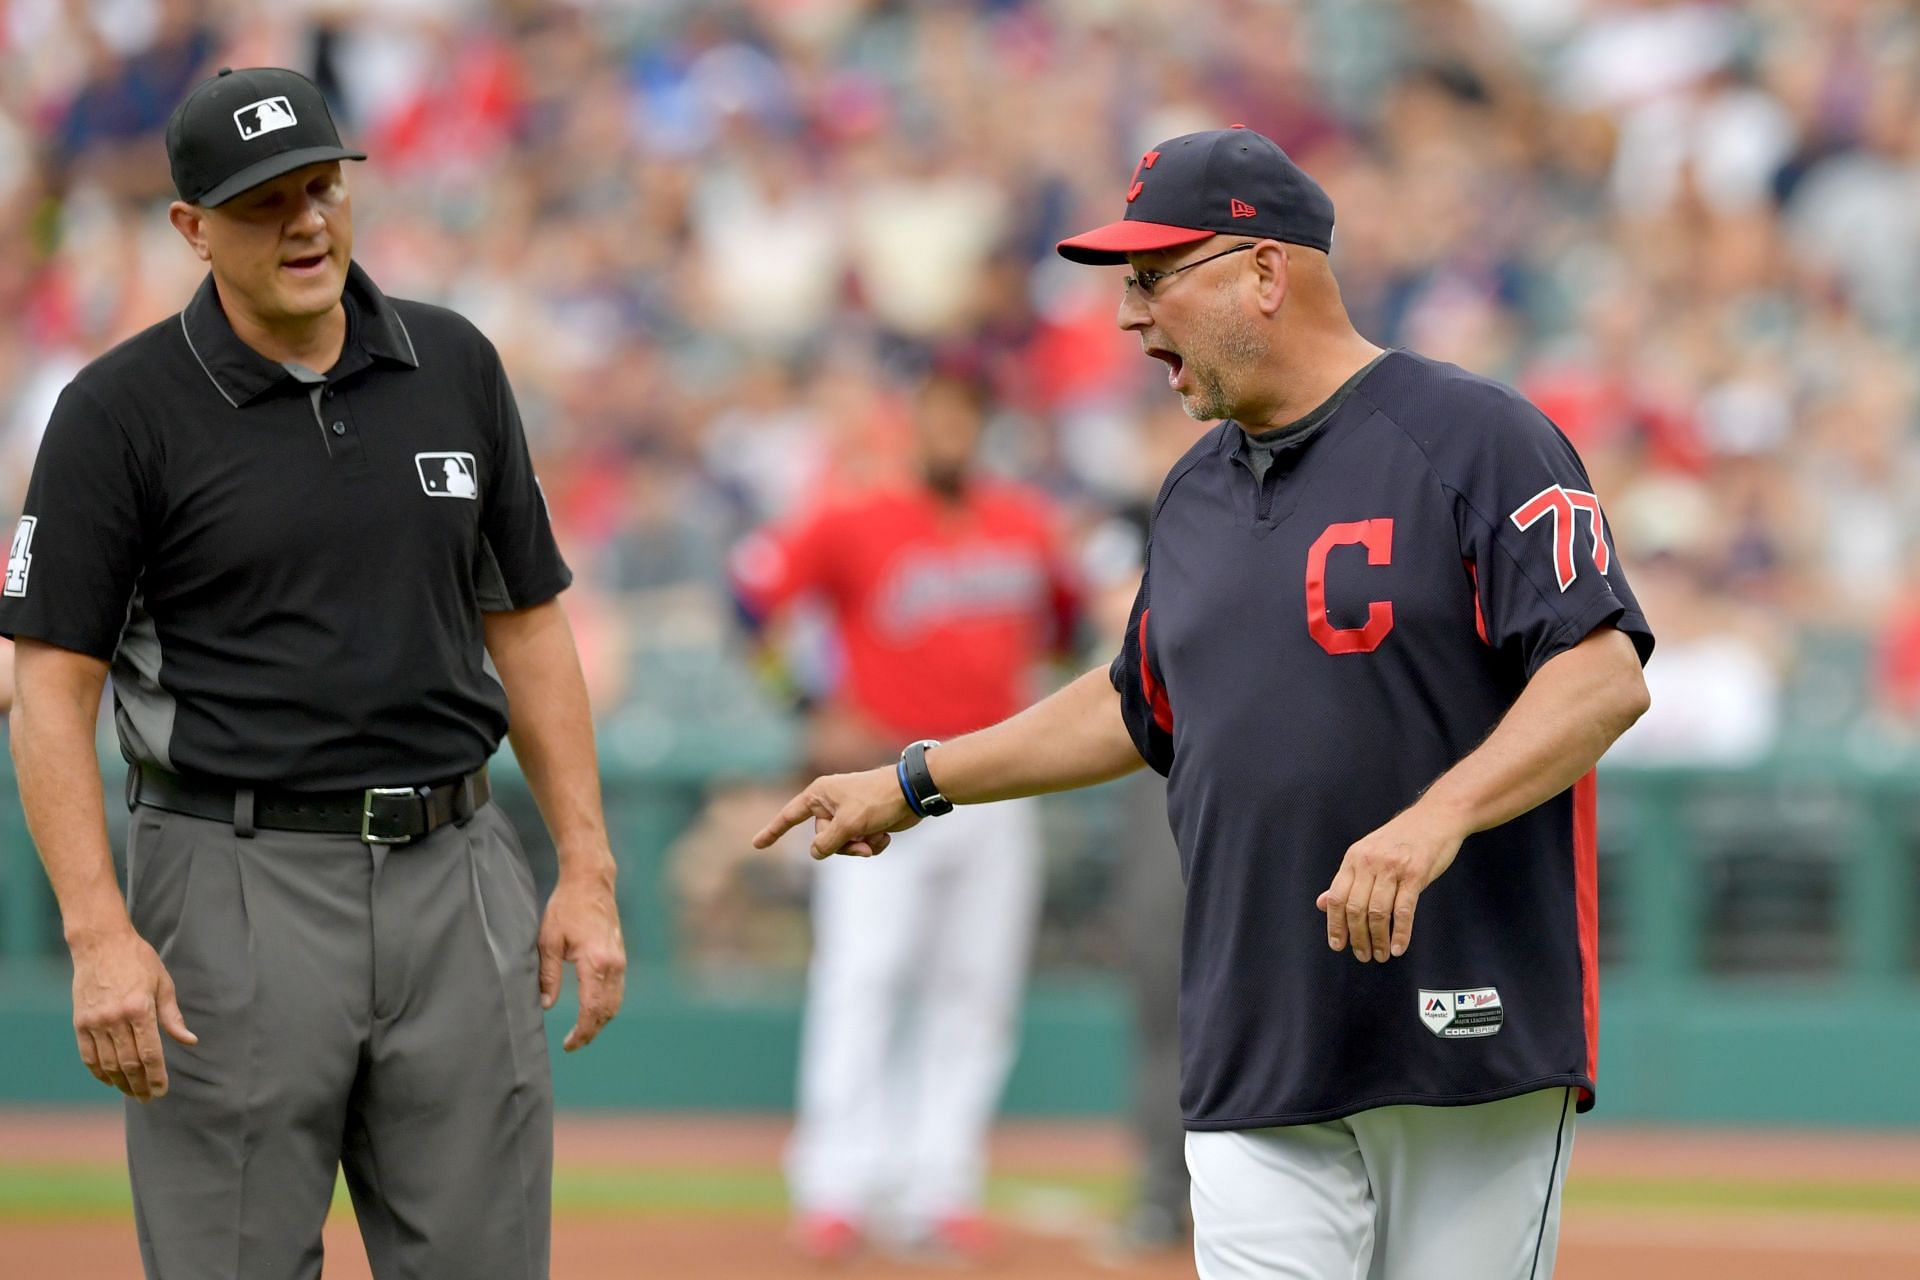 MLB: NY Yankees were right, umpires were wrong in two recent instances